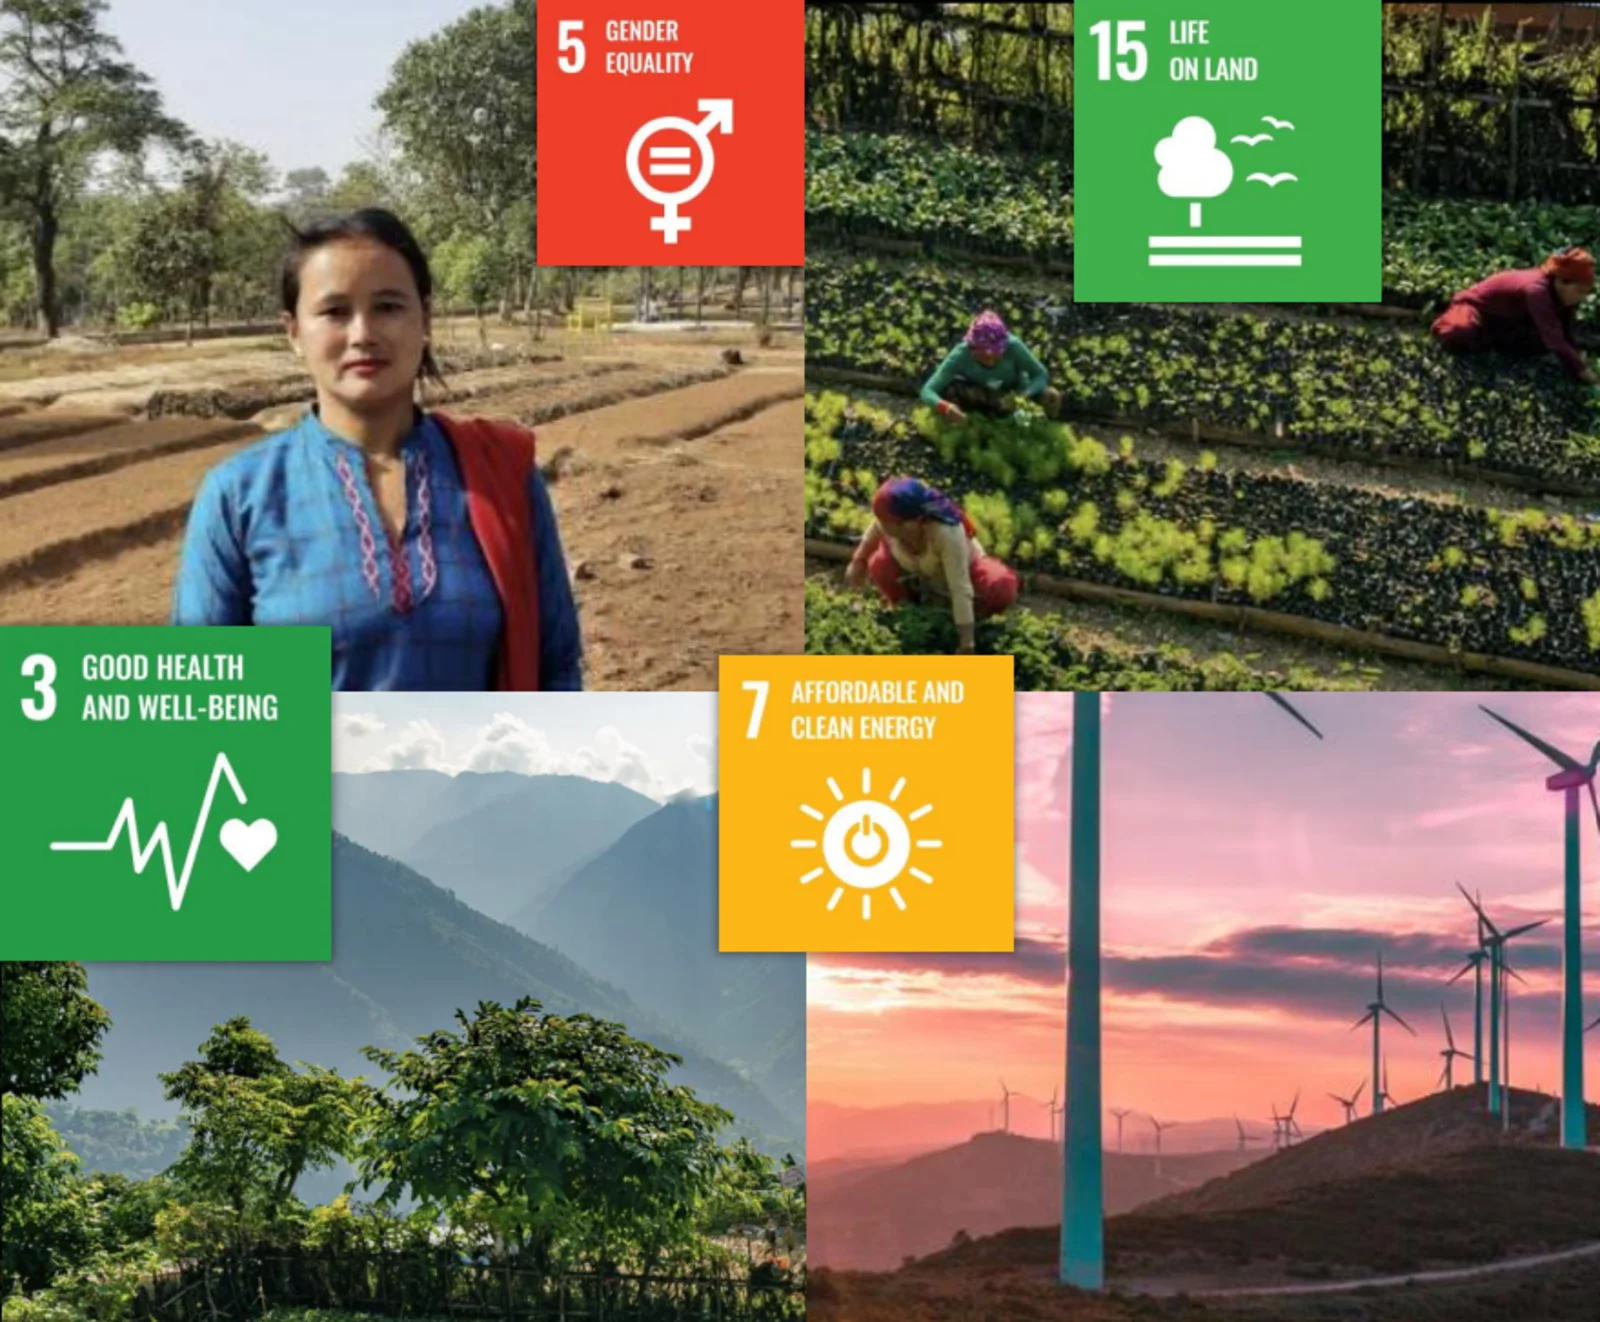 4 themes in 1 picture shows 5 gender equality, 15 life on land, good health and well-being and affordable and clean energy